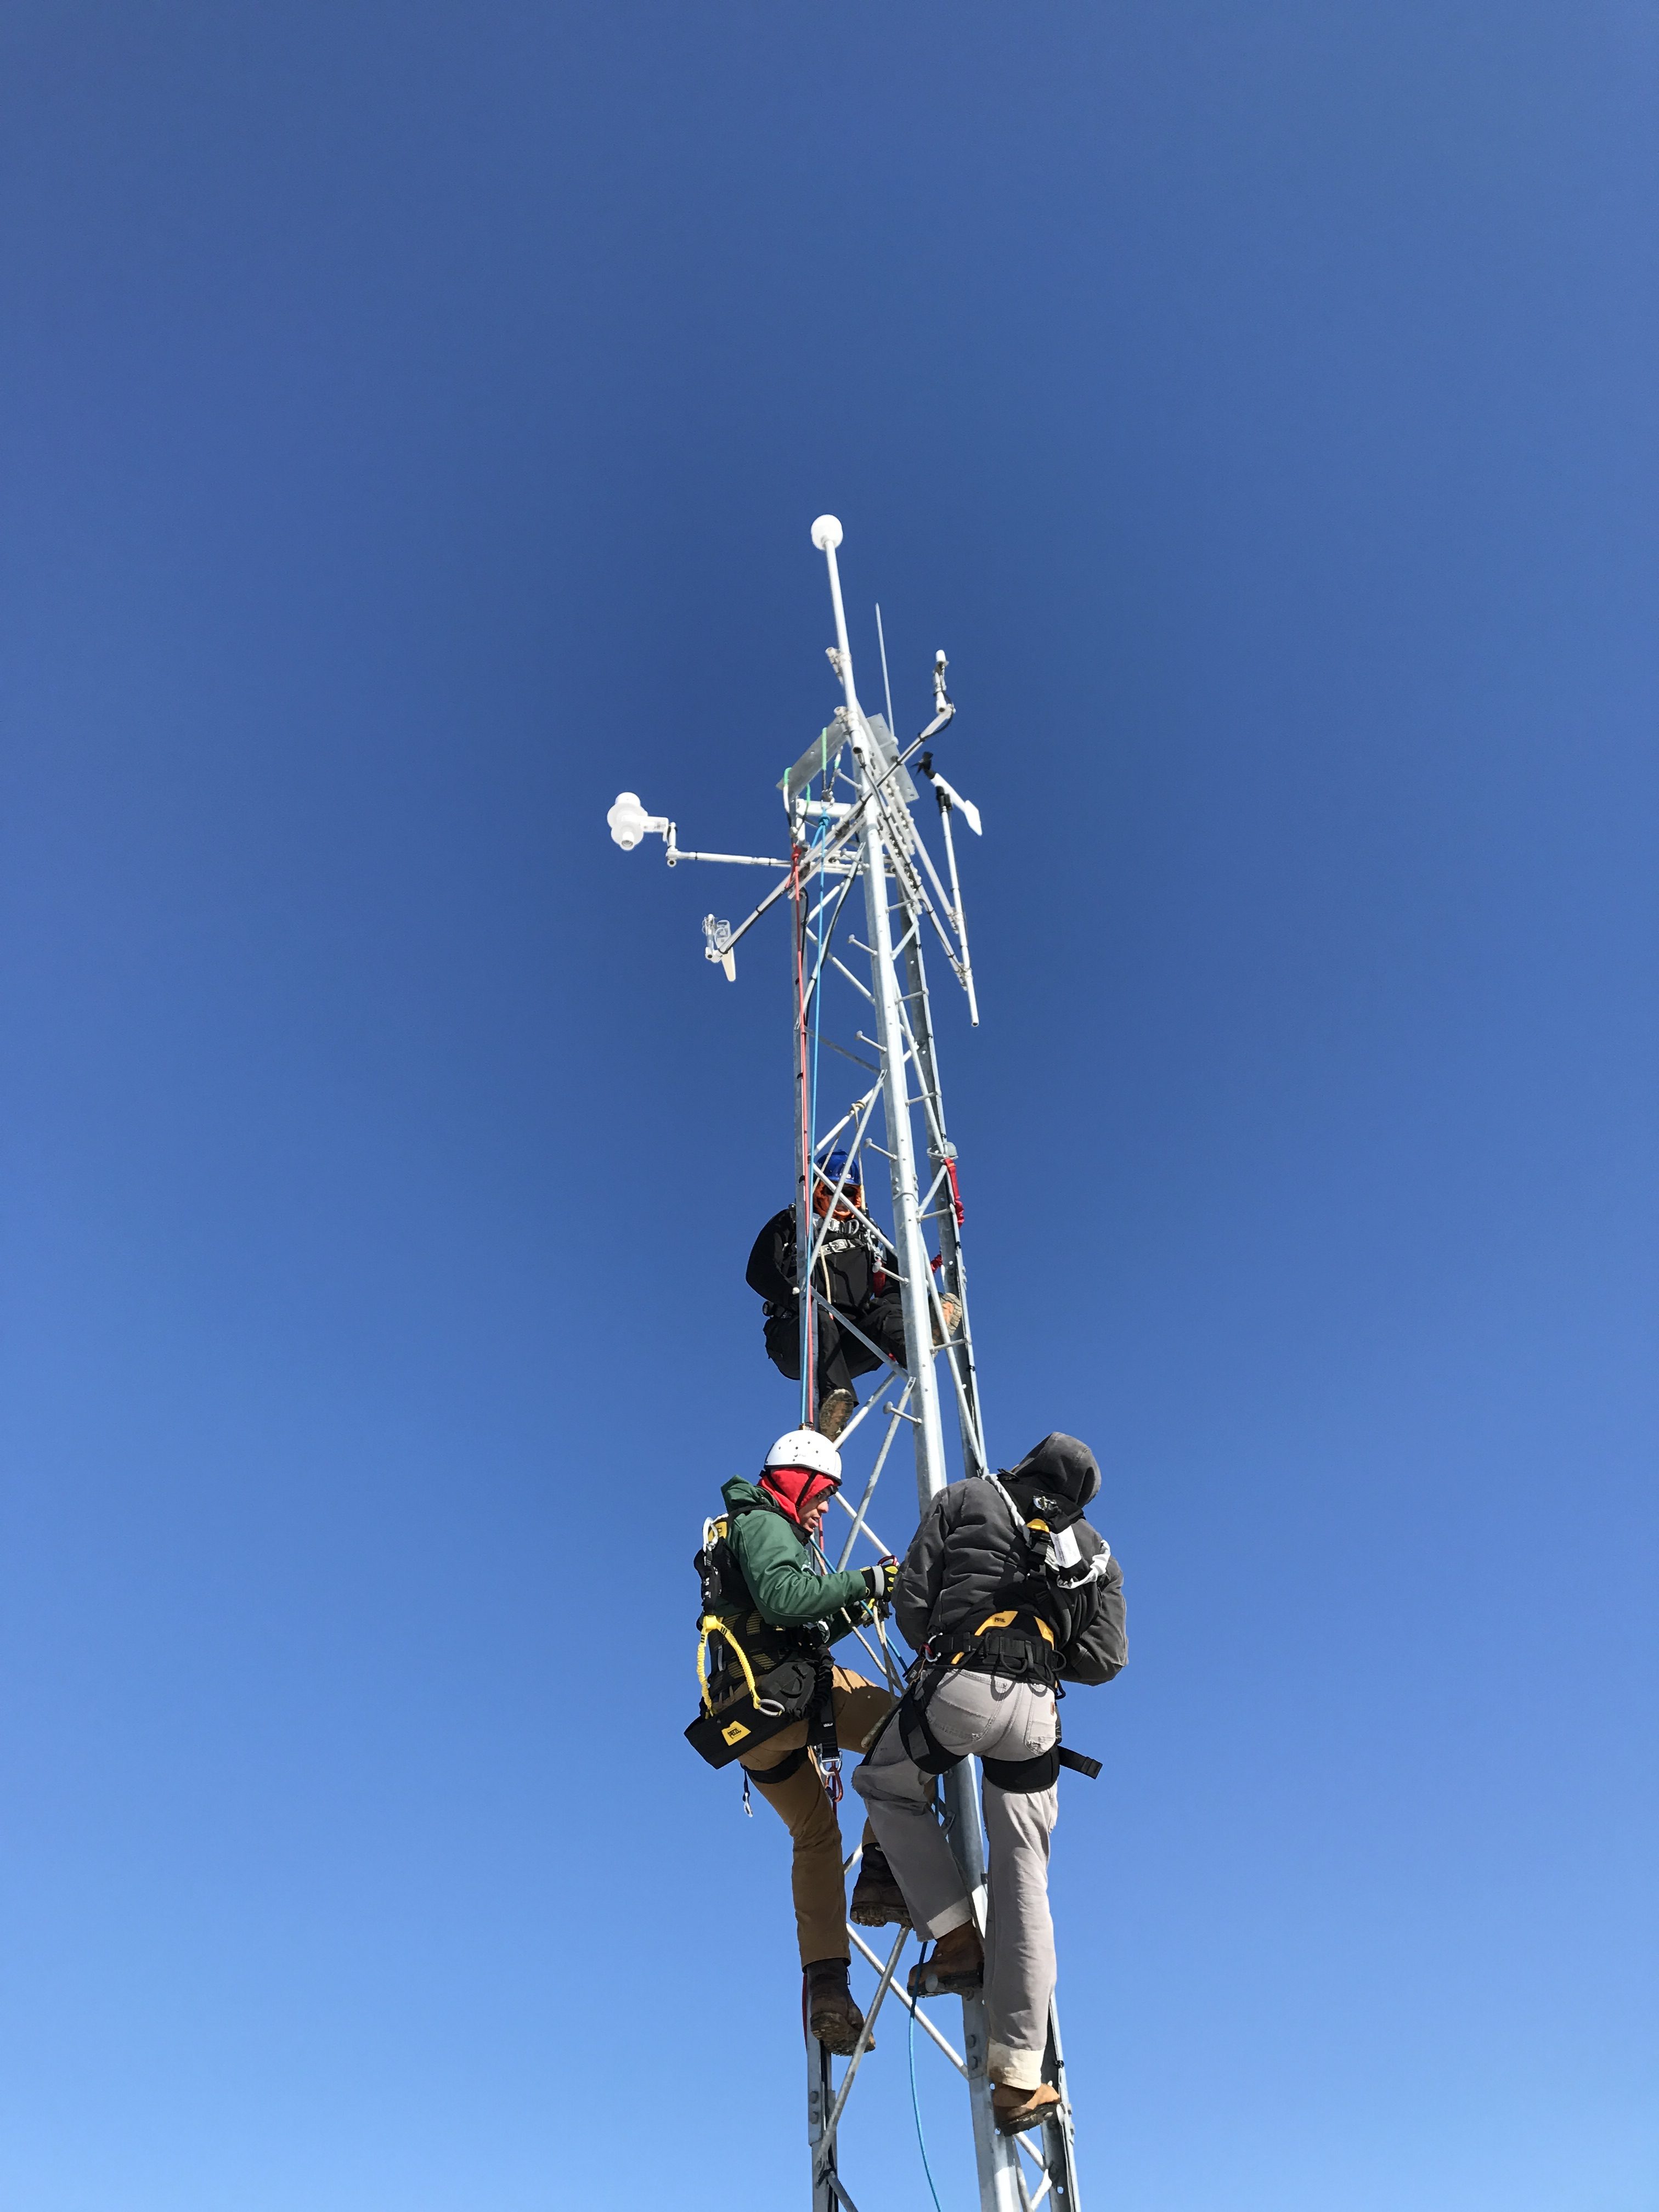 Climbing towers in the cold…  Training, Caution and being Prepared….